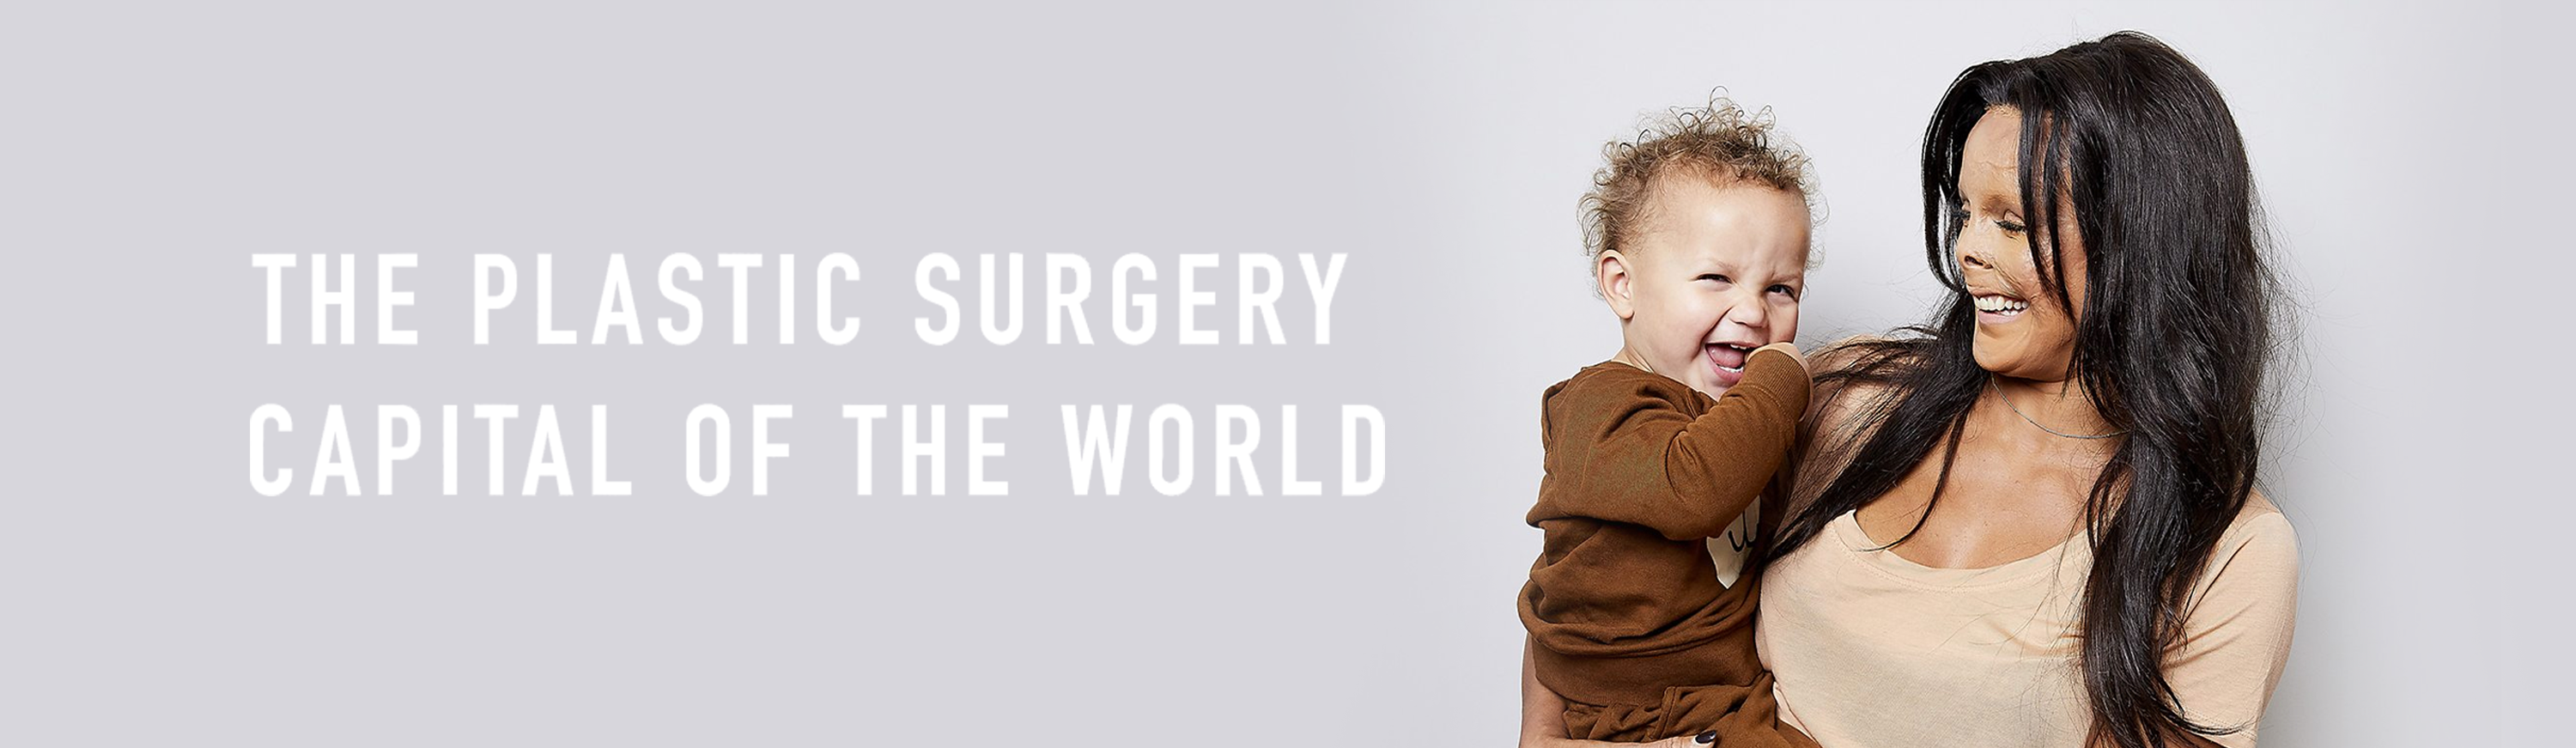 The Plastic Surgery Capital of the World